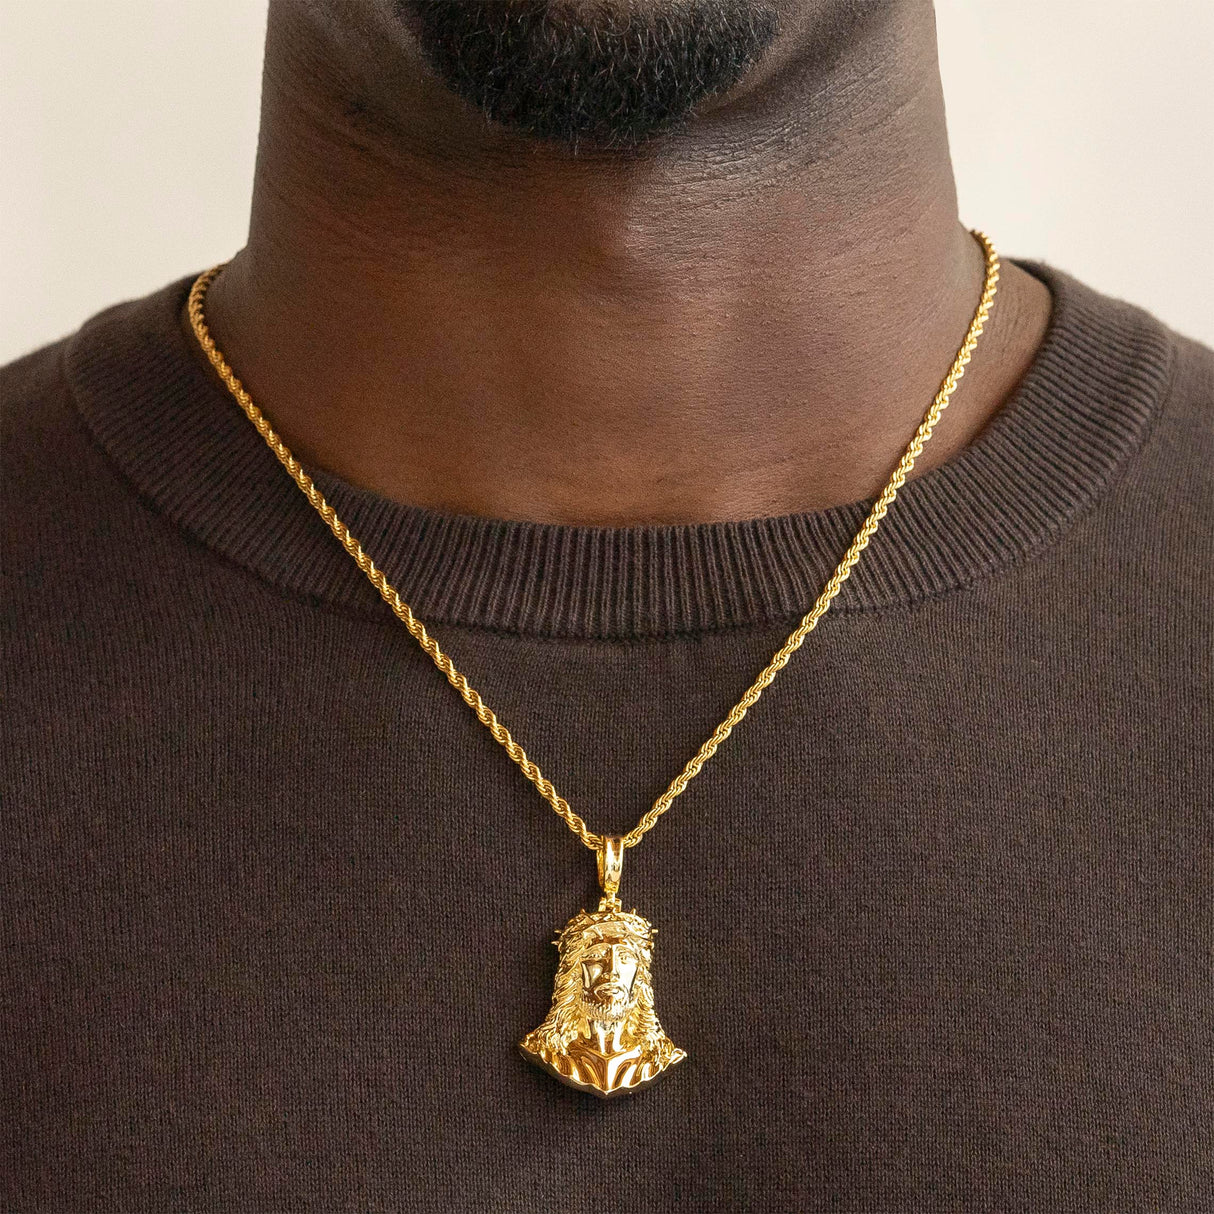 Jesus Piece Necklace Pendant & Rope Chain The Gold Gods